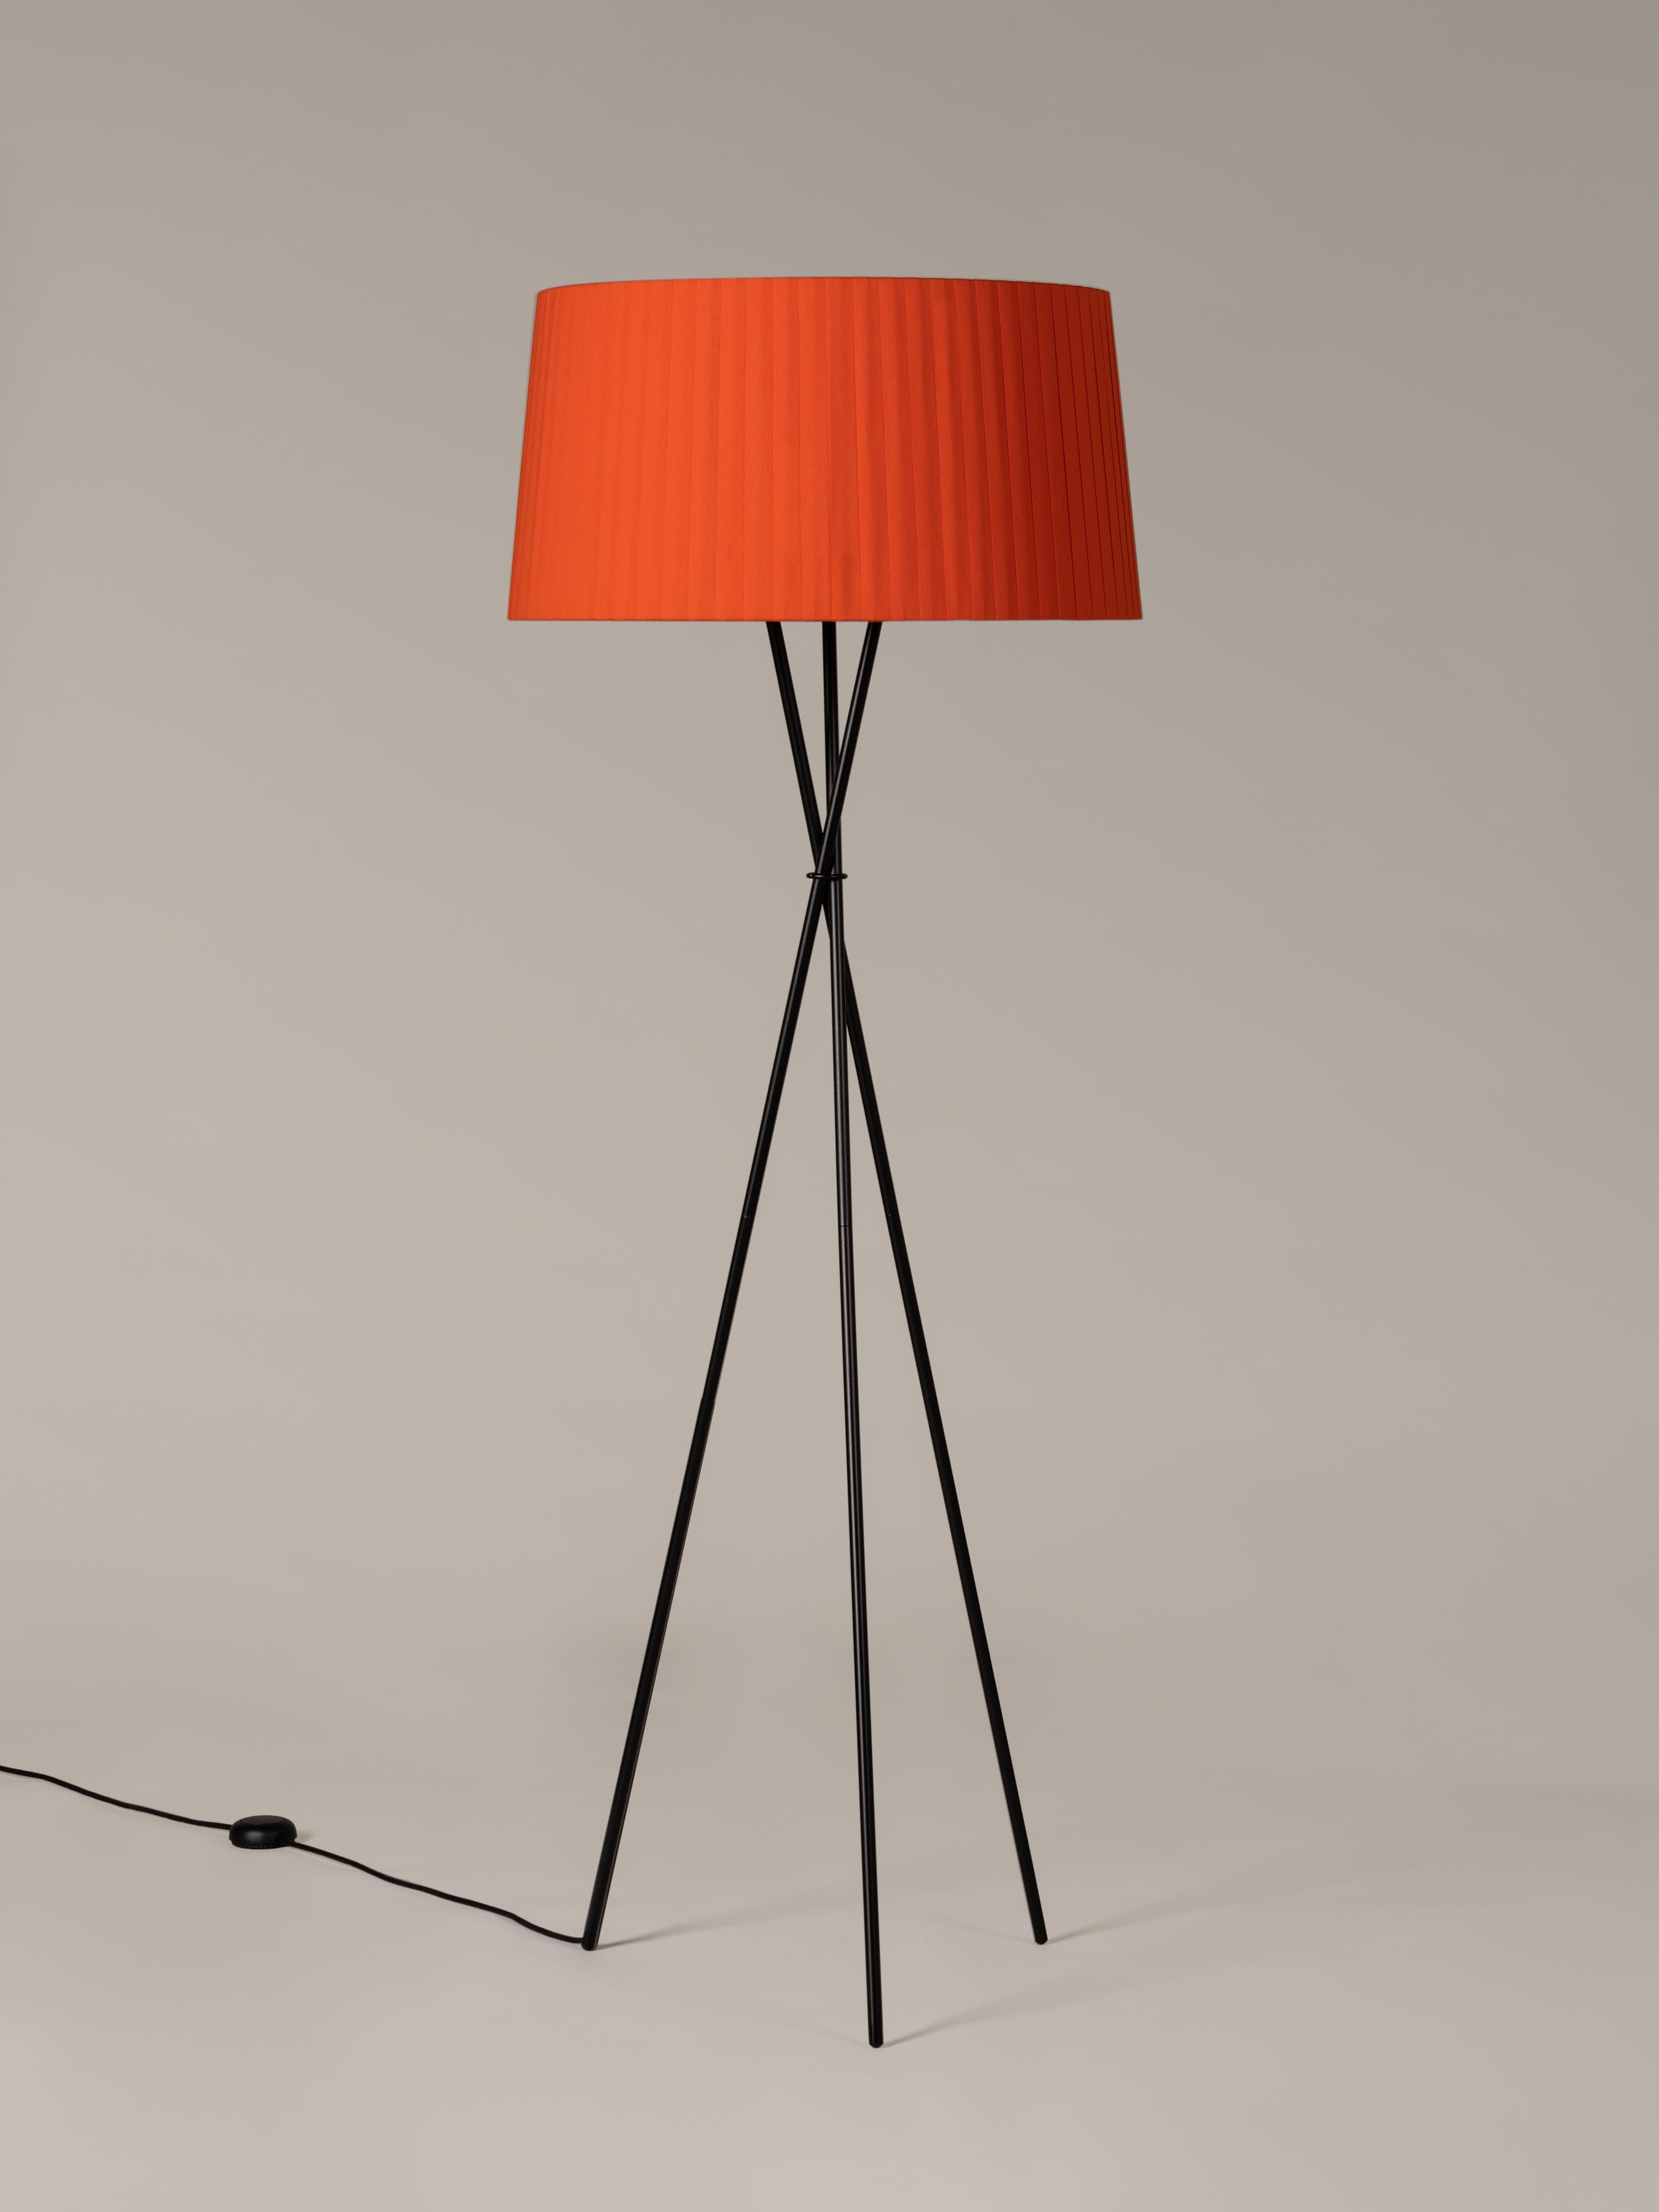 Red Trípode G5 floor lamp by Santa & Cole
Dimensions: D 62 x H 168 cm
Materials: Metal, ribbon.
Available in other colors.

Trípode humanises neutral spaces with its colourful and functional sobriety. The shade is hand ribboned and its base could